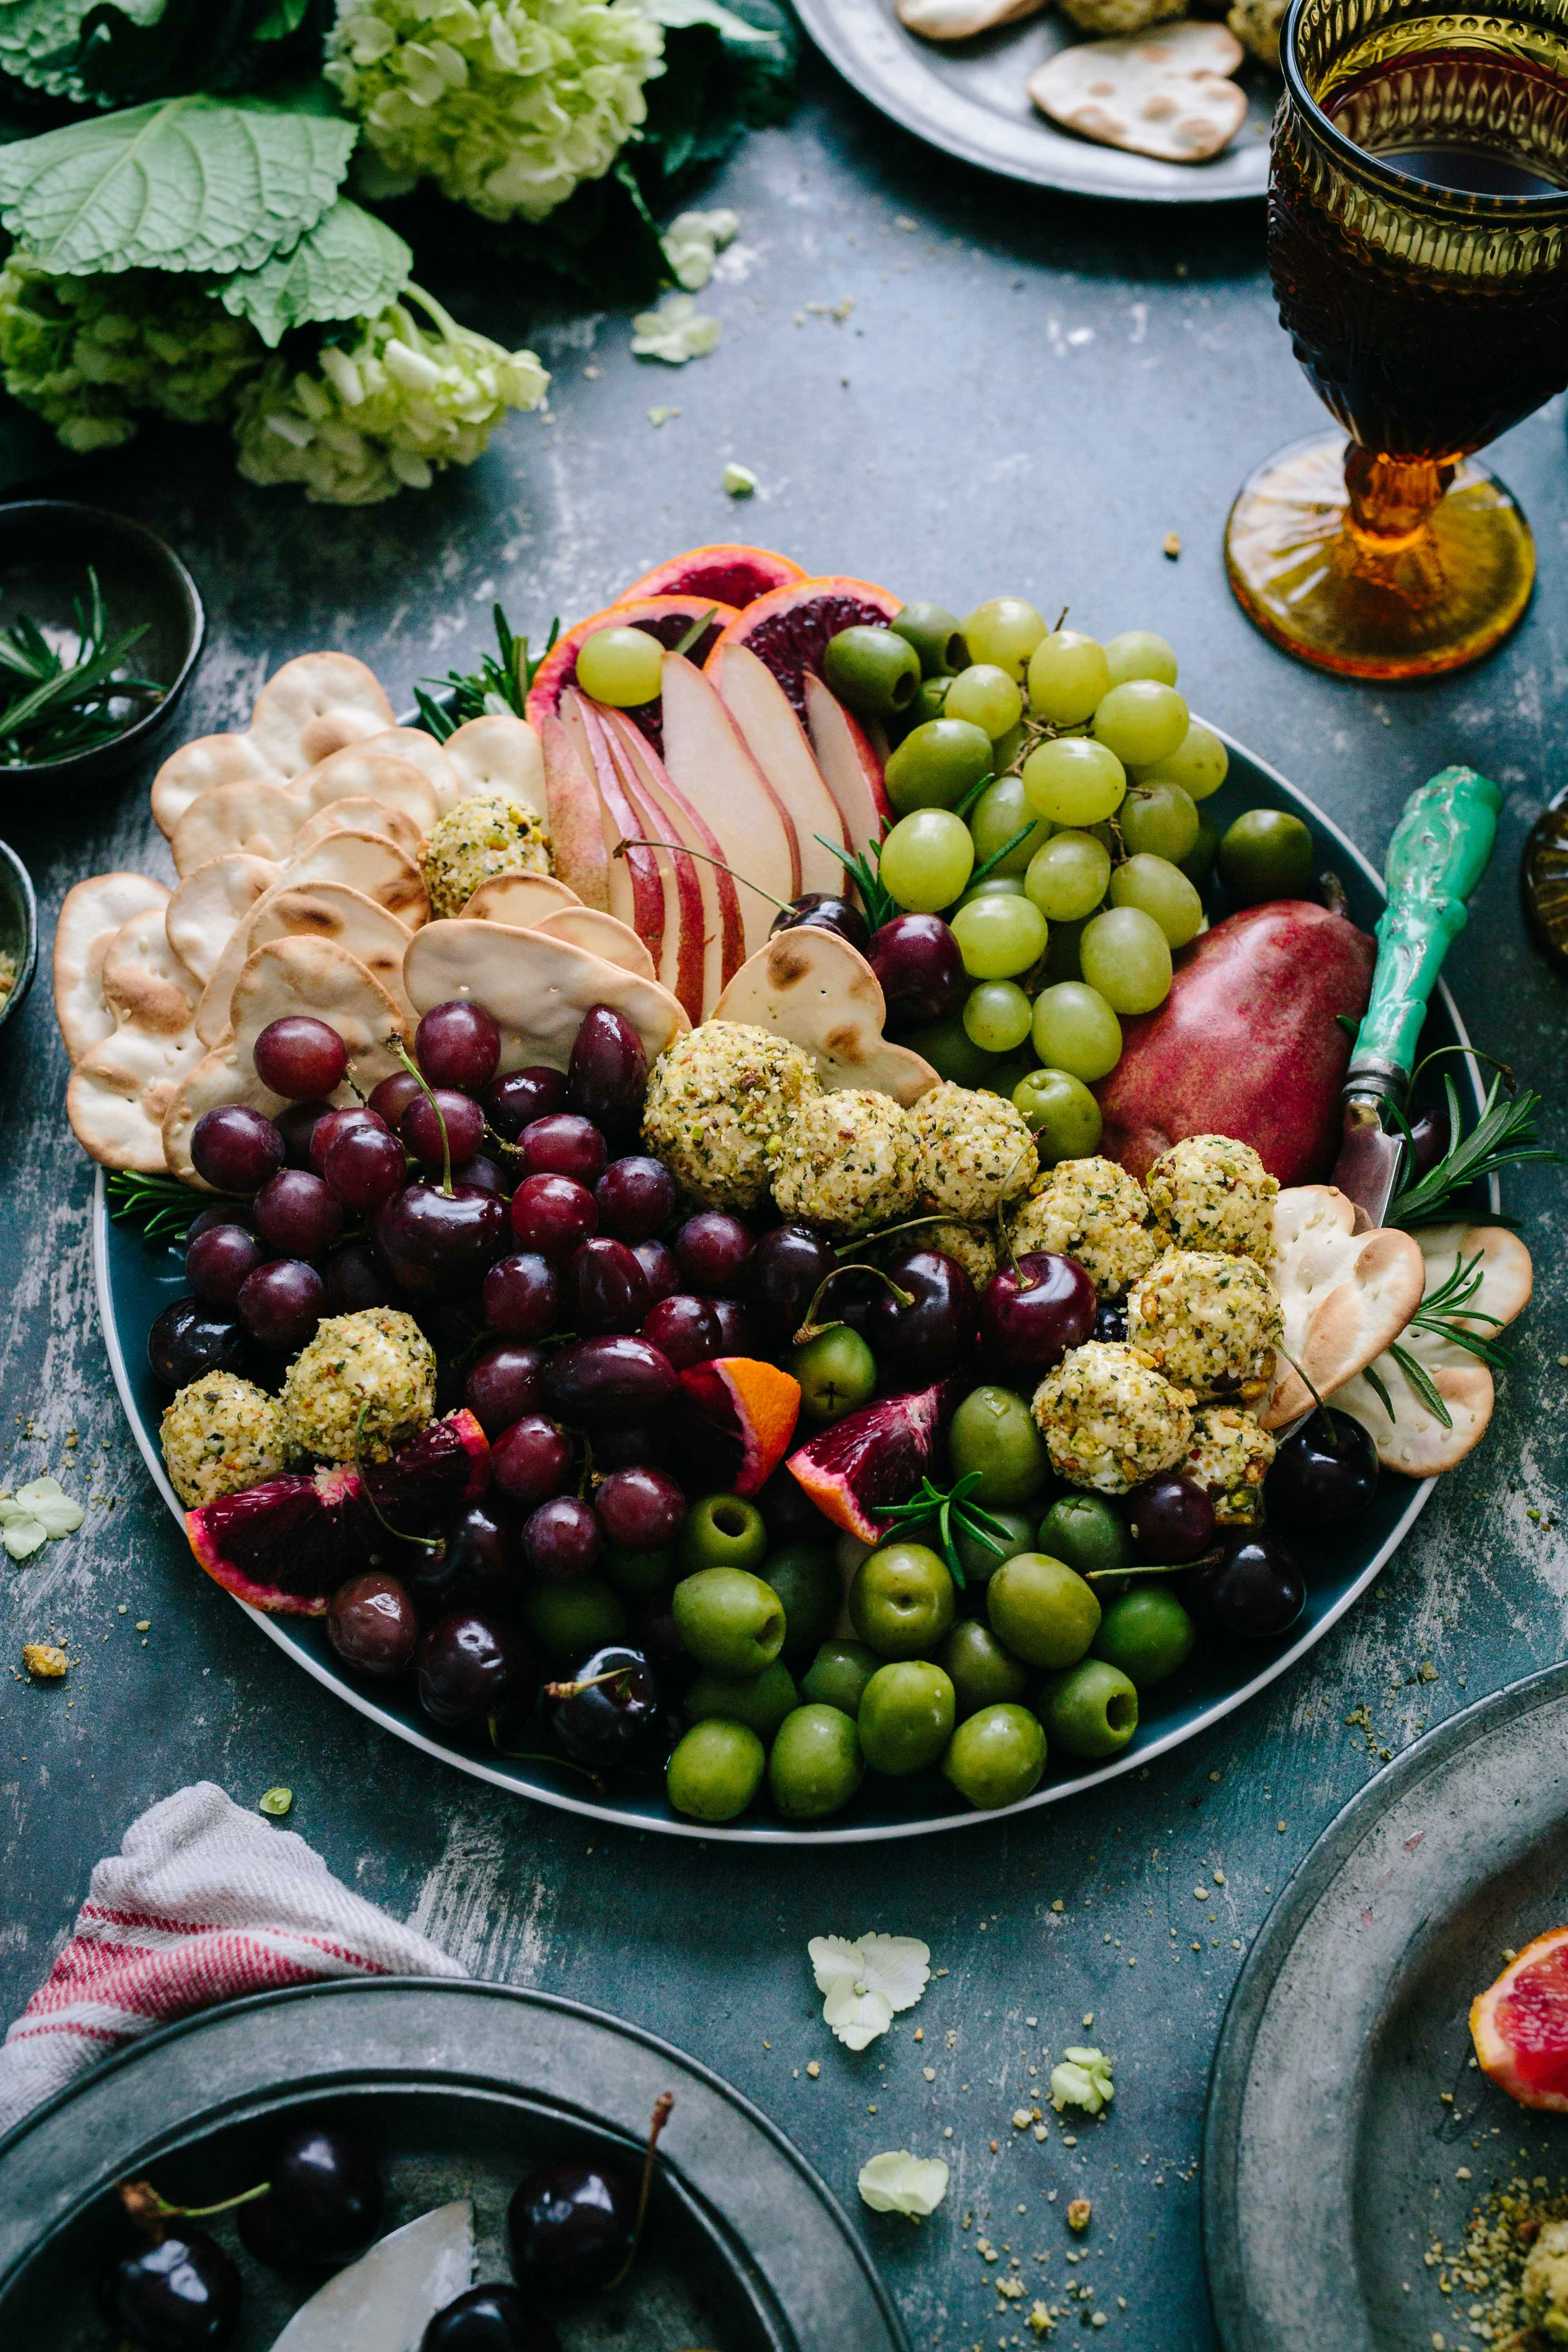 It was time to put together a party dish, and I was downright feeling lazy. Platter time! Pile on oodles of winter fruits, pretty little water crackers, pistachio-crusted goat cheese. And bazinga. Life is good.